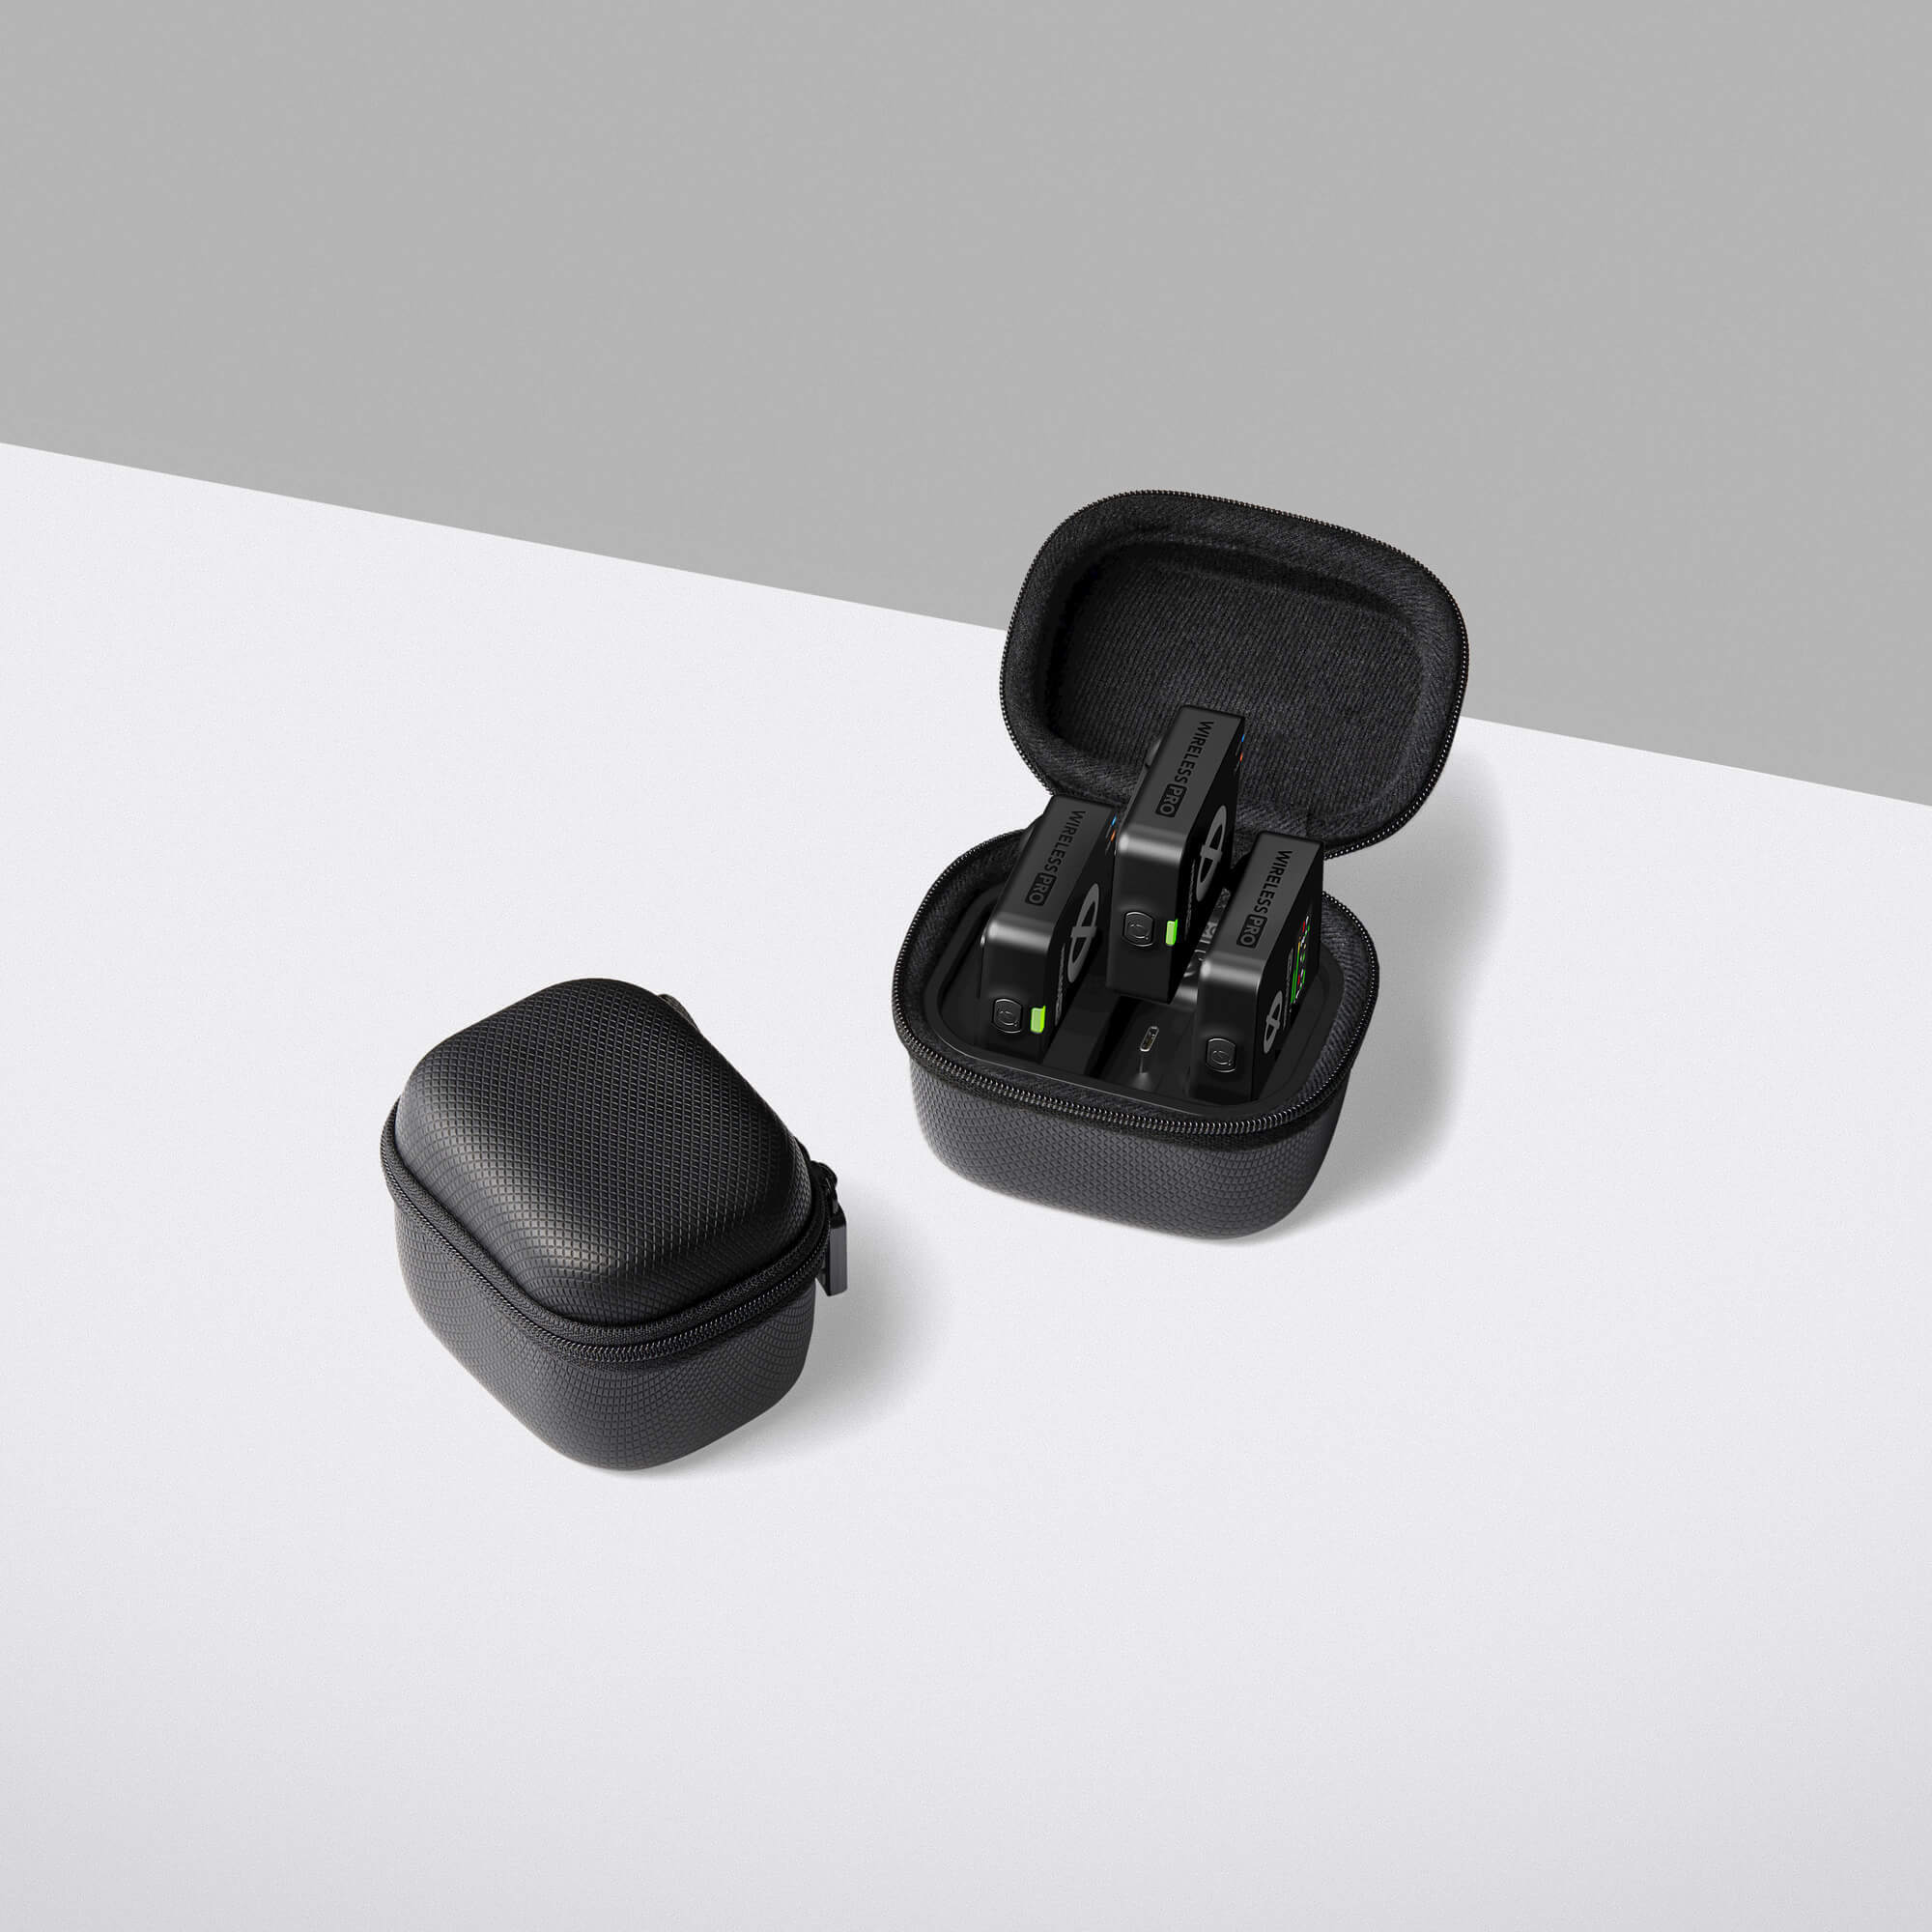 rode-wireless-pro-charging-case-packaging-insitu-8192x5464-rgb-2000x2000-40ad247